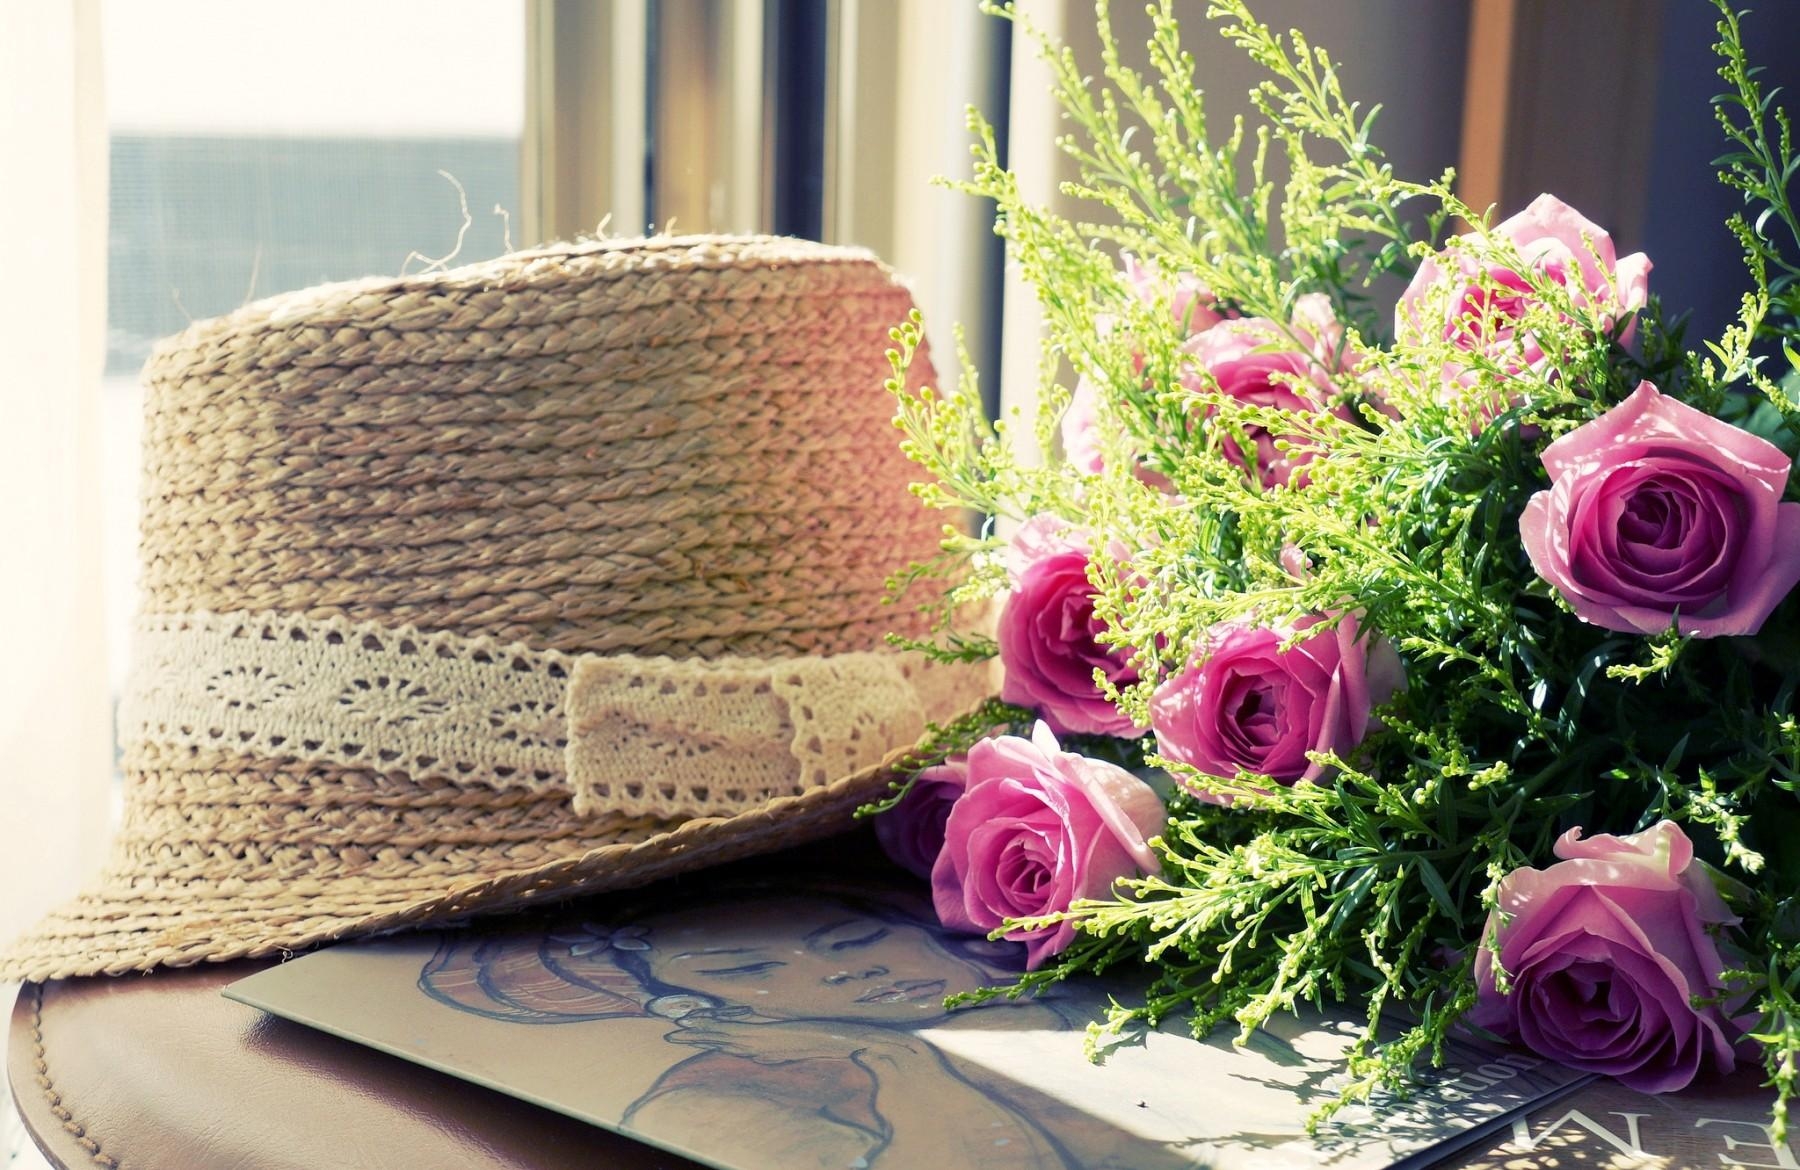 greens, flowers, roses, picture, bouquet, hat